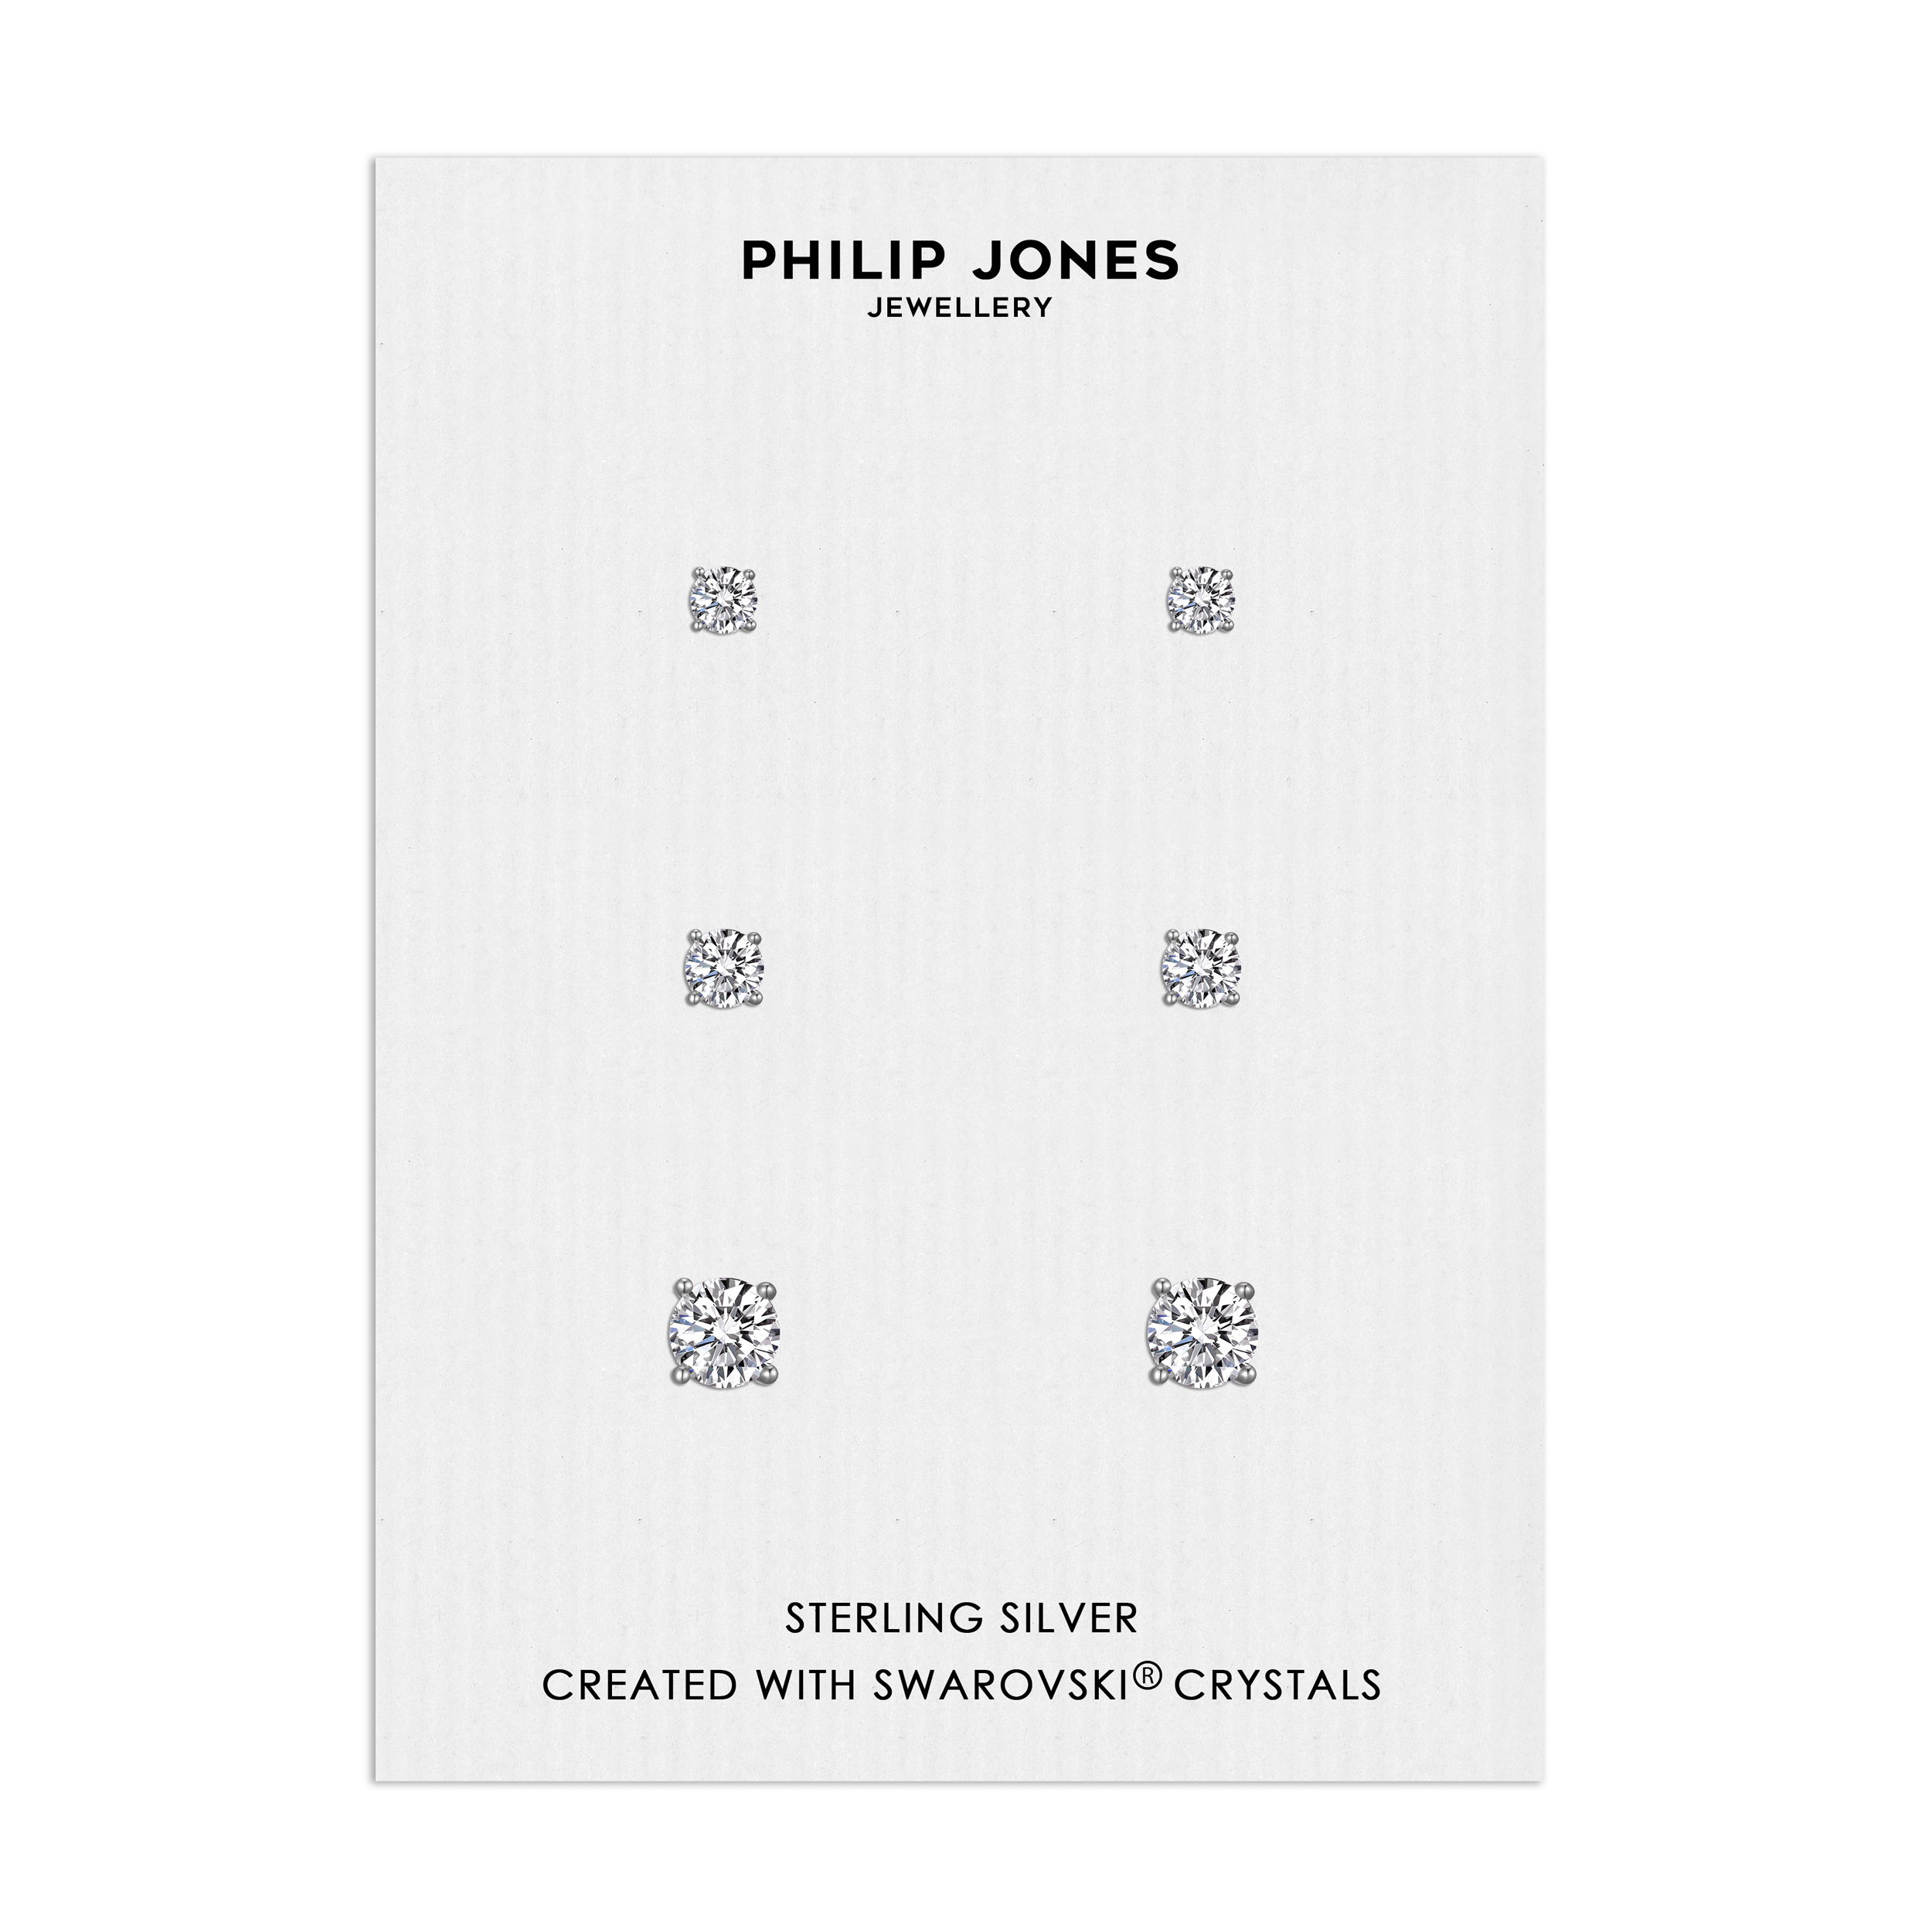 Sterling Silver 3 Pack of 4, 5, and 6mm Earrings Created with Zircondia® Crystals by Philip Jones Jewellery